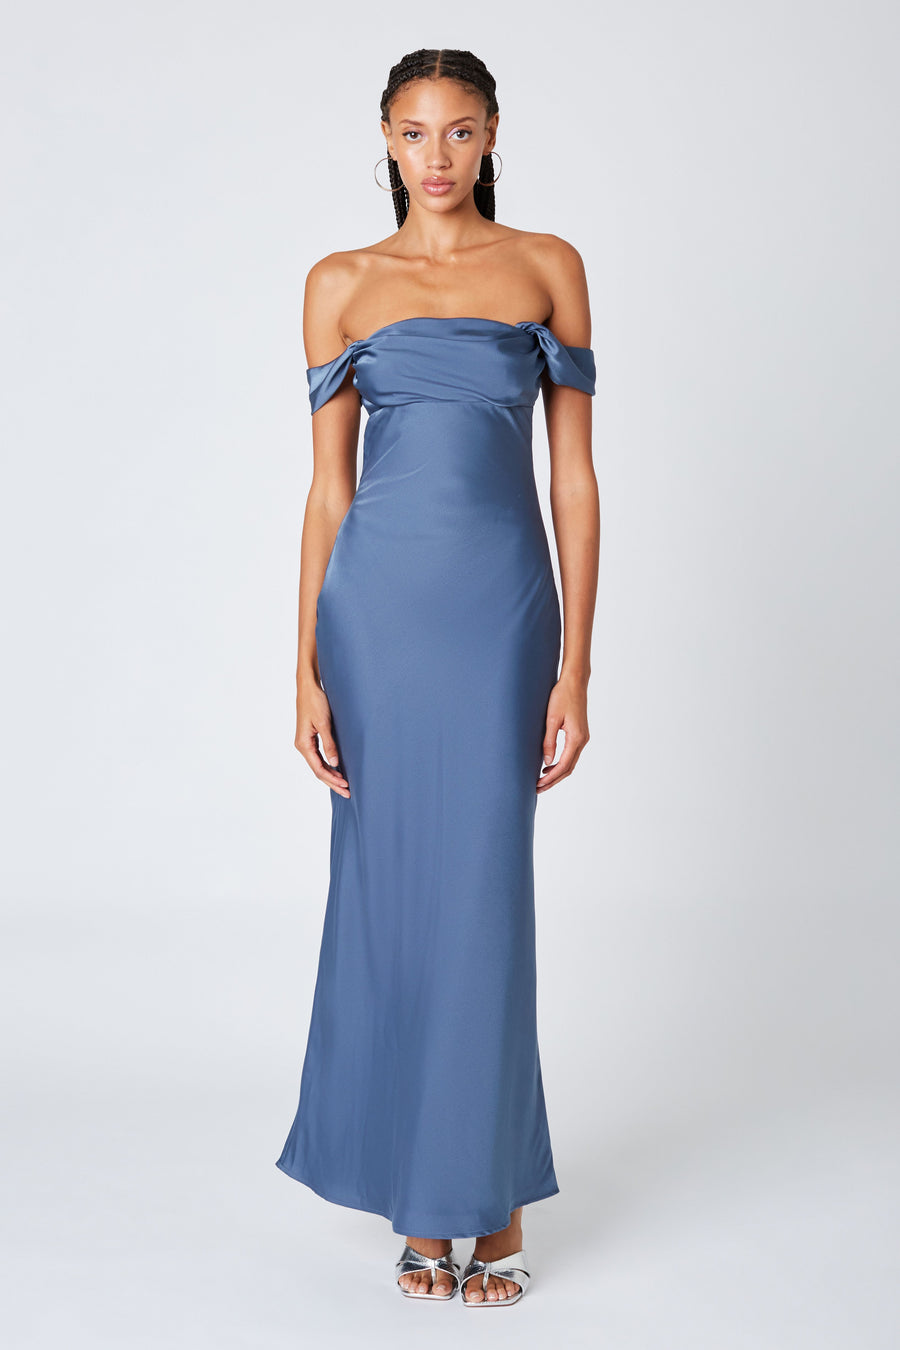 Blue Steel midi/maxi dress with an off the shoulder look. 